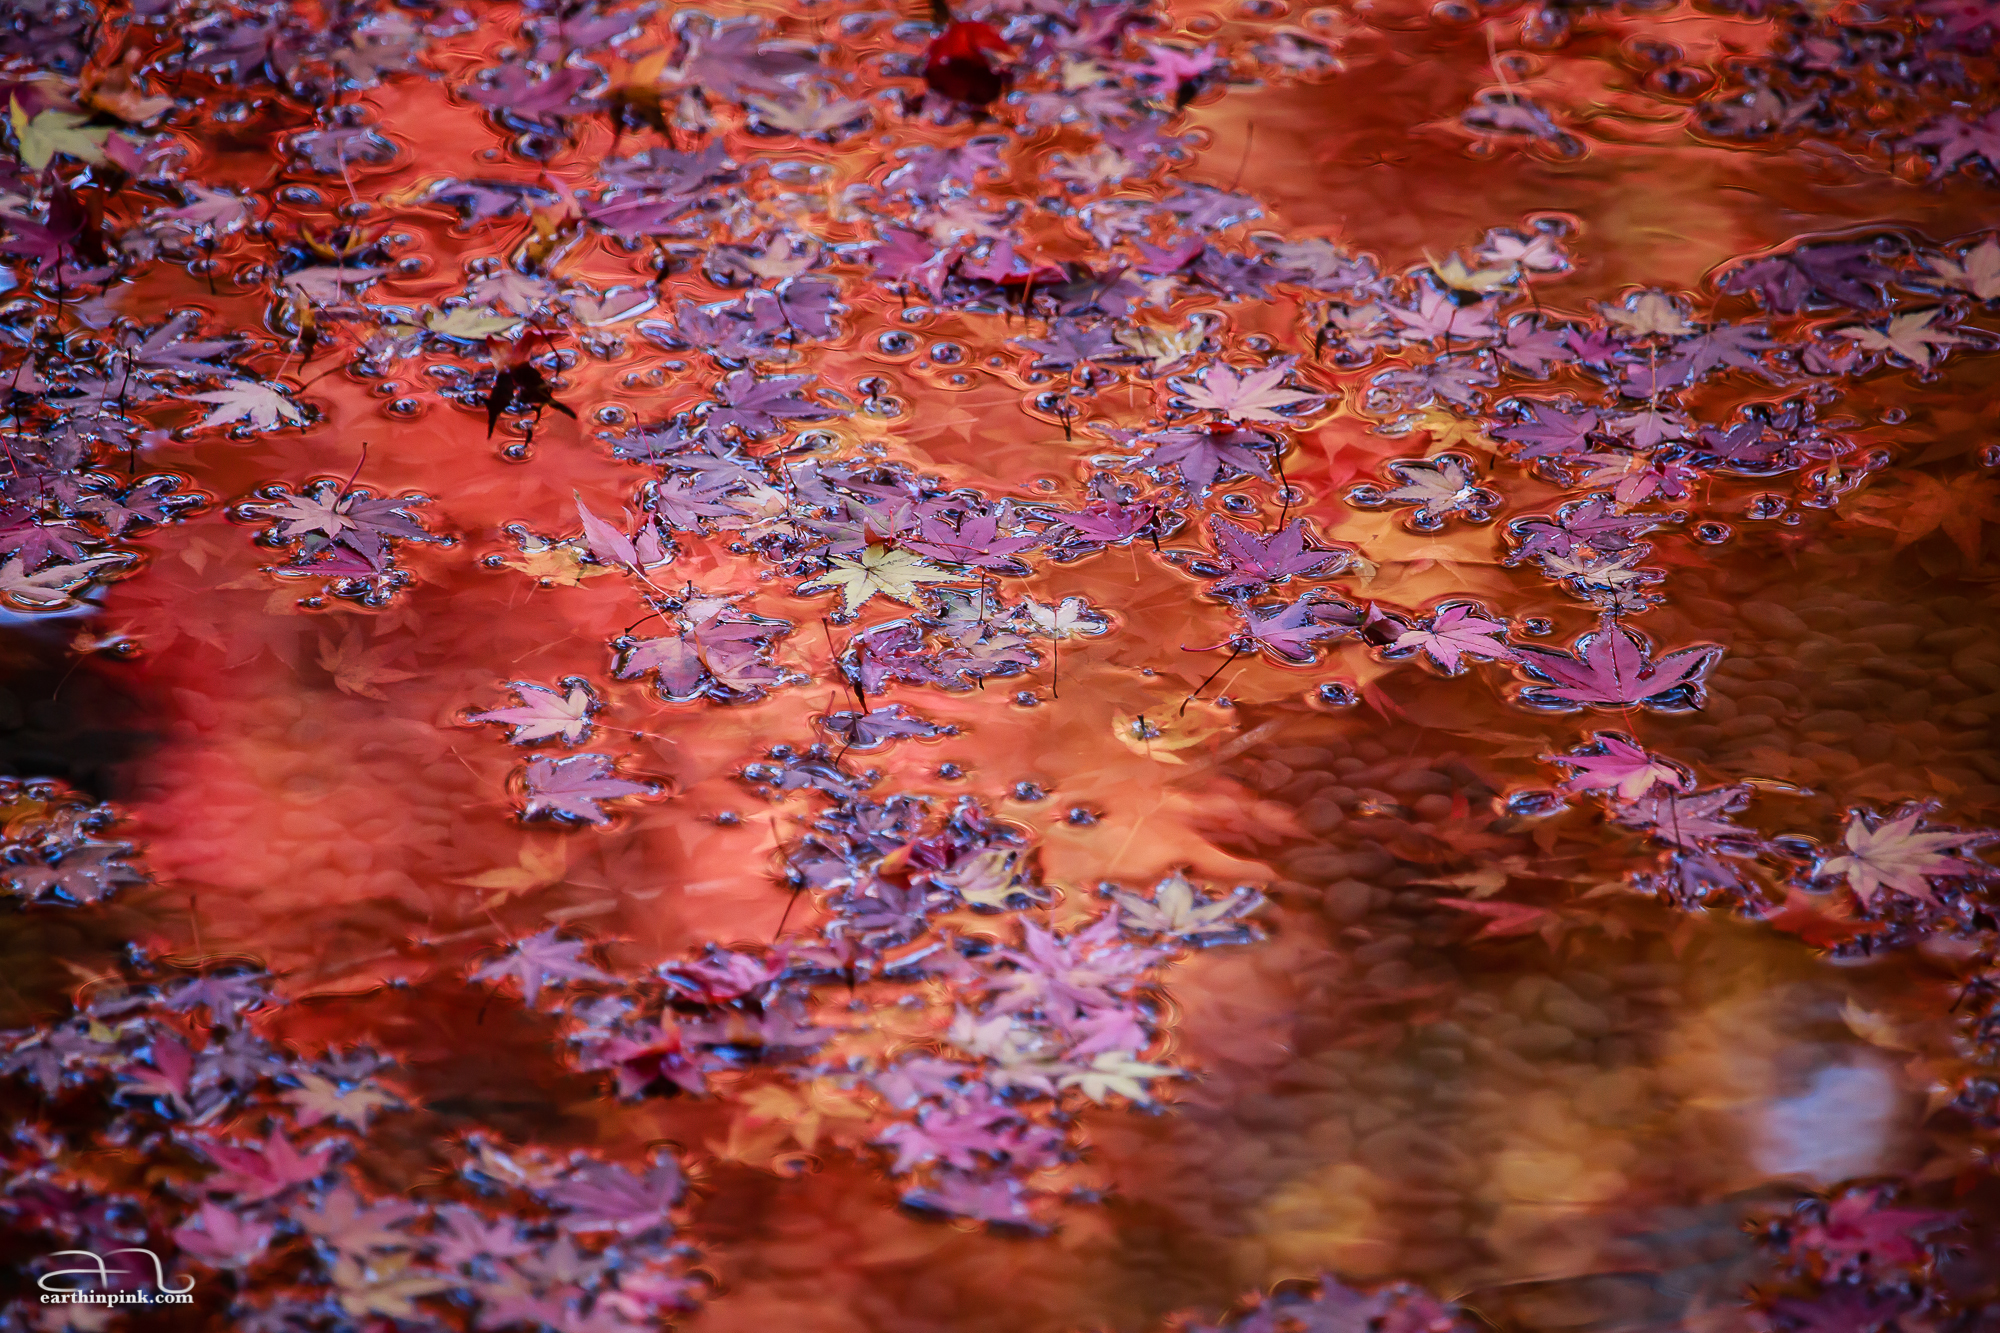 A zoomed-in view of a pond at the Hogonin temple in Arashiyama shows fallen leaves floating on the surface, while the water reflects an image of the red maple trees above in the late afternoon light.